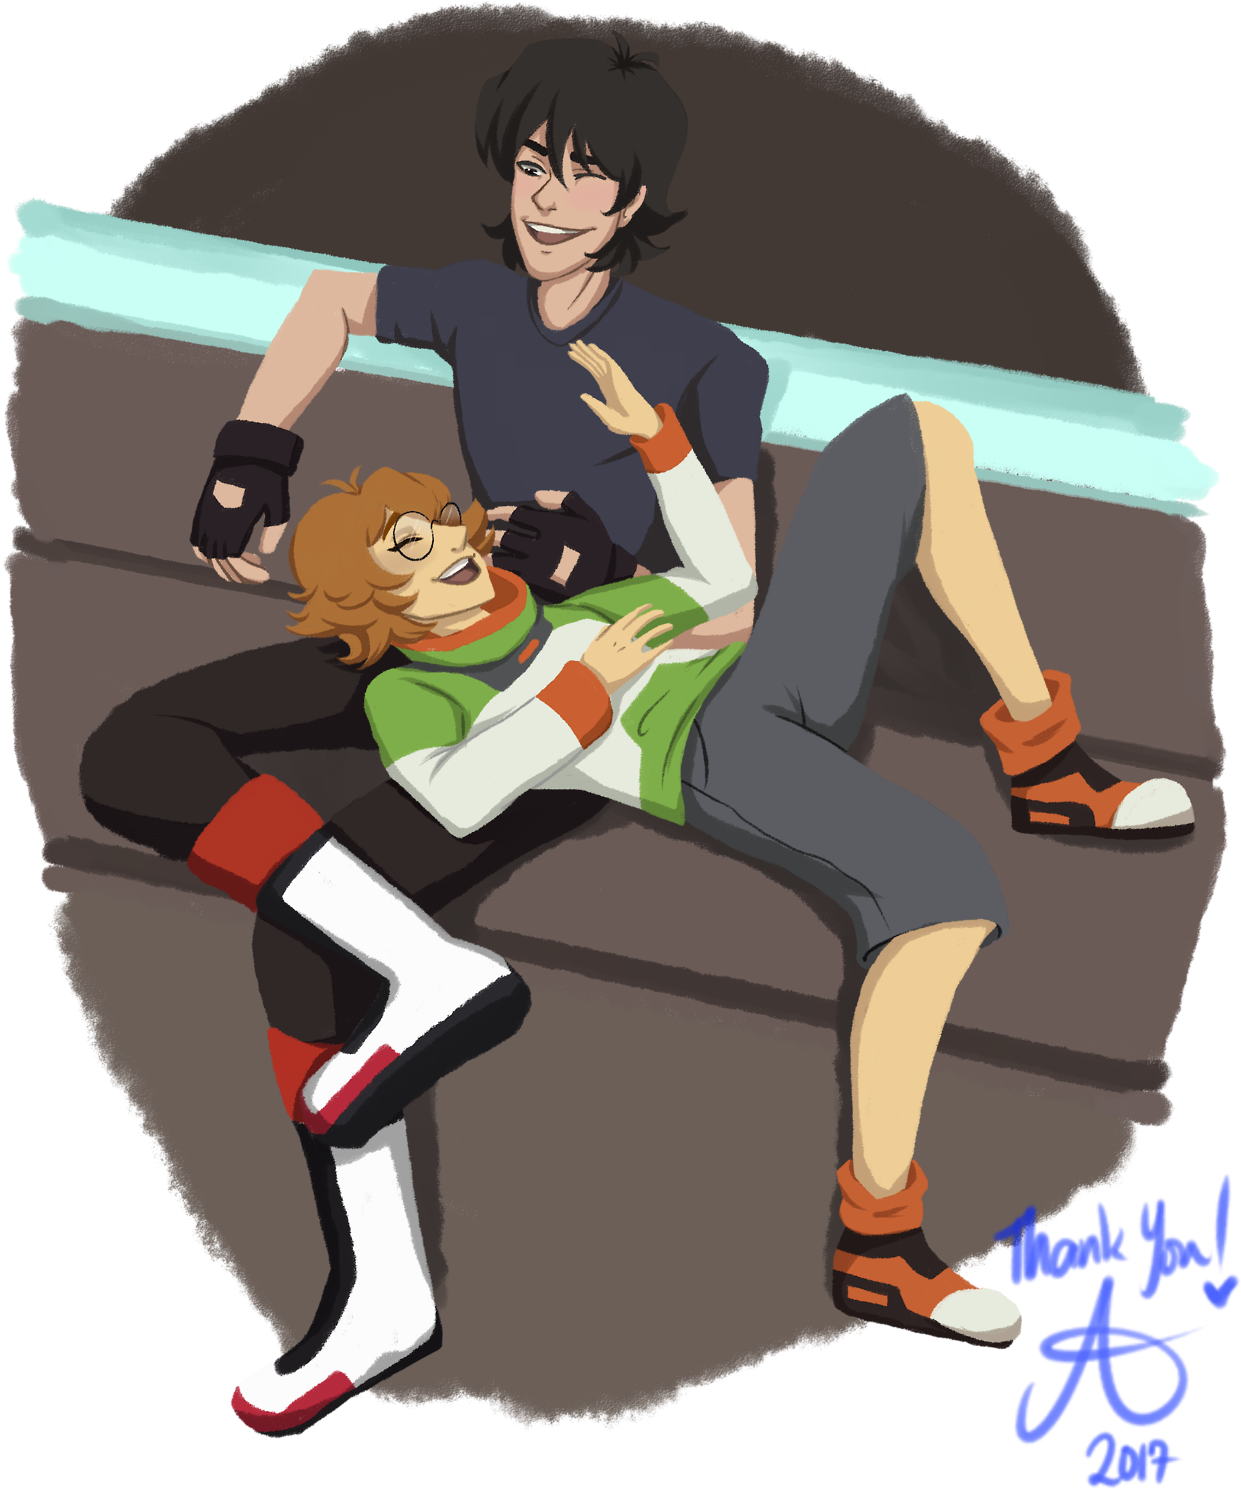 Keith And Pidge Having Fun On The Couch And Hang Out - Keith X Pidge (1280x1600)